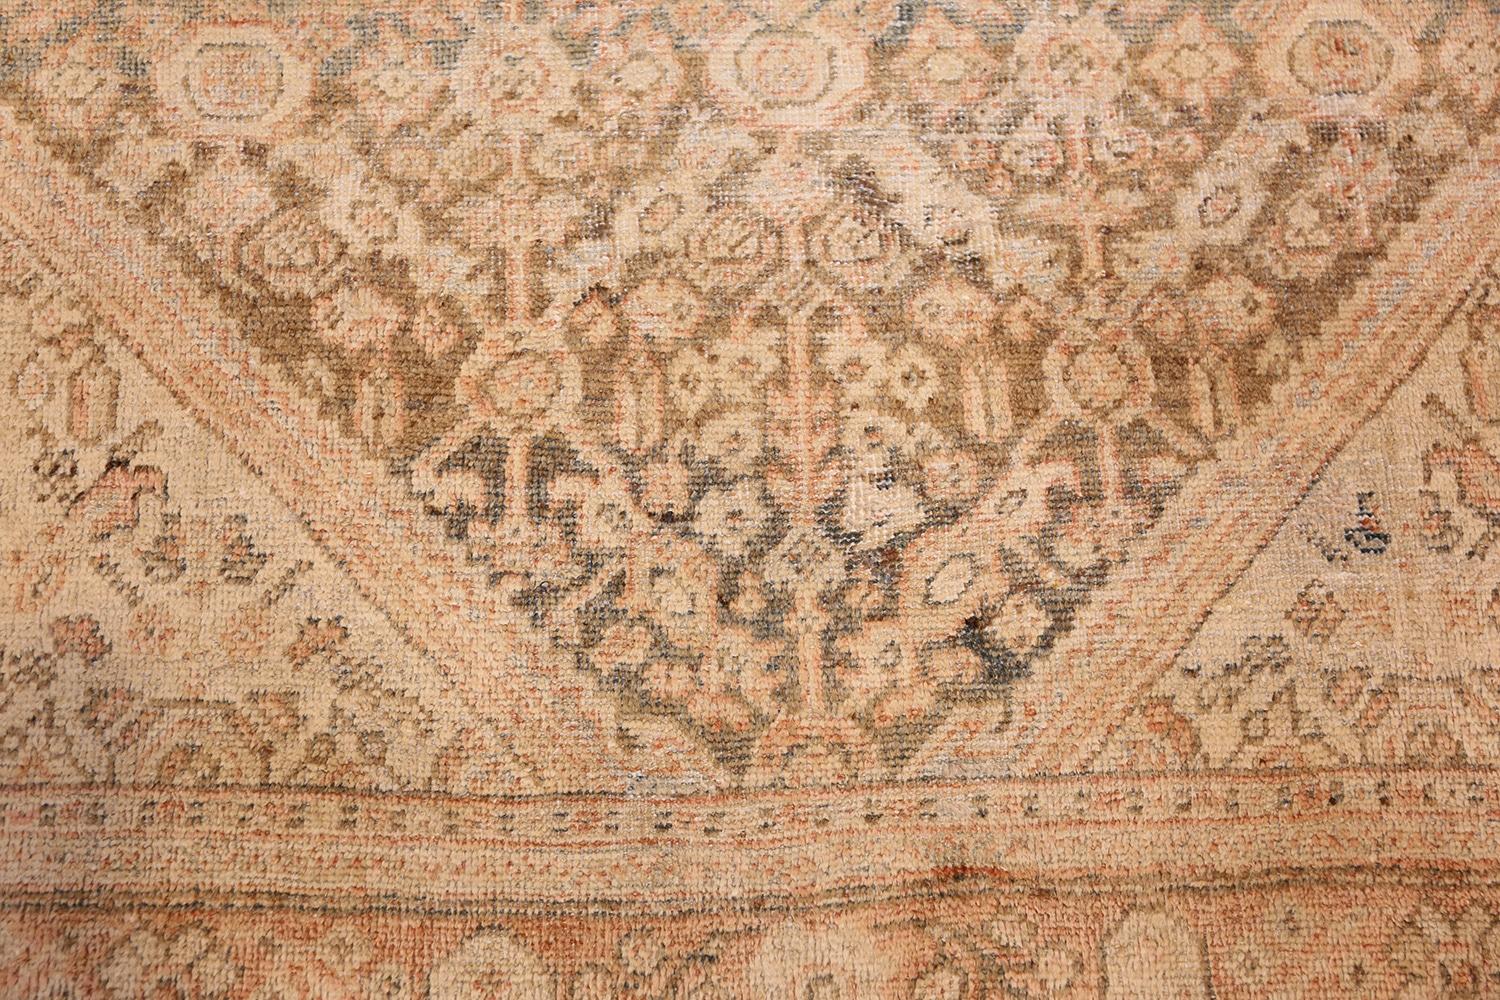 Tribal Antique Persian Mahal Rug. Size: 4 ft 4 in x 6 ft 10 in For Sale